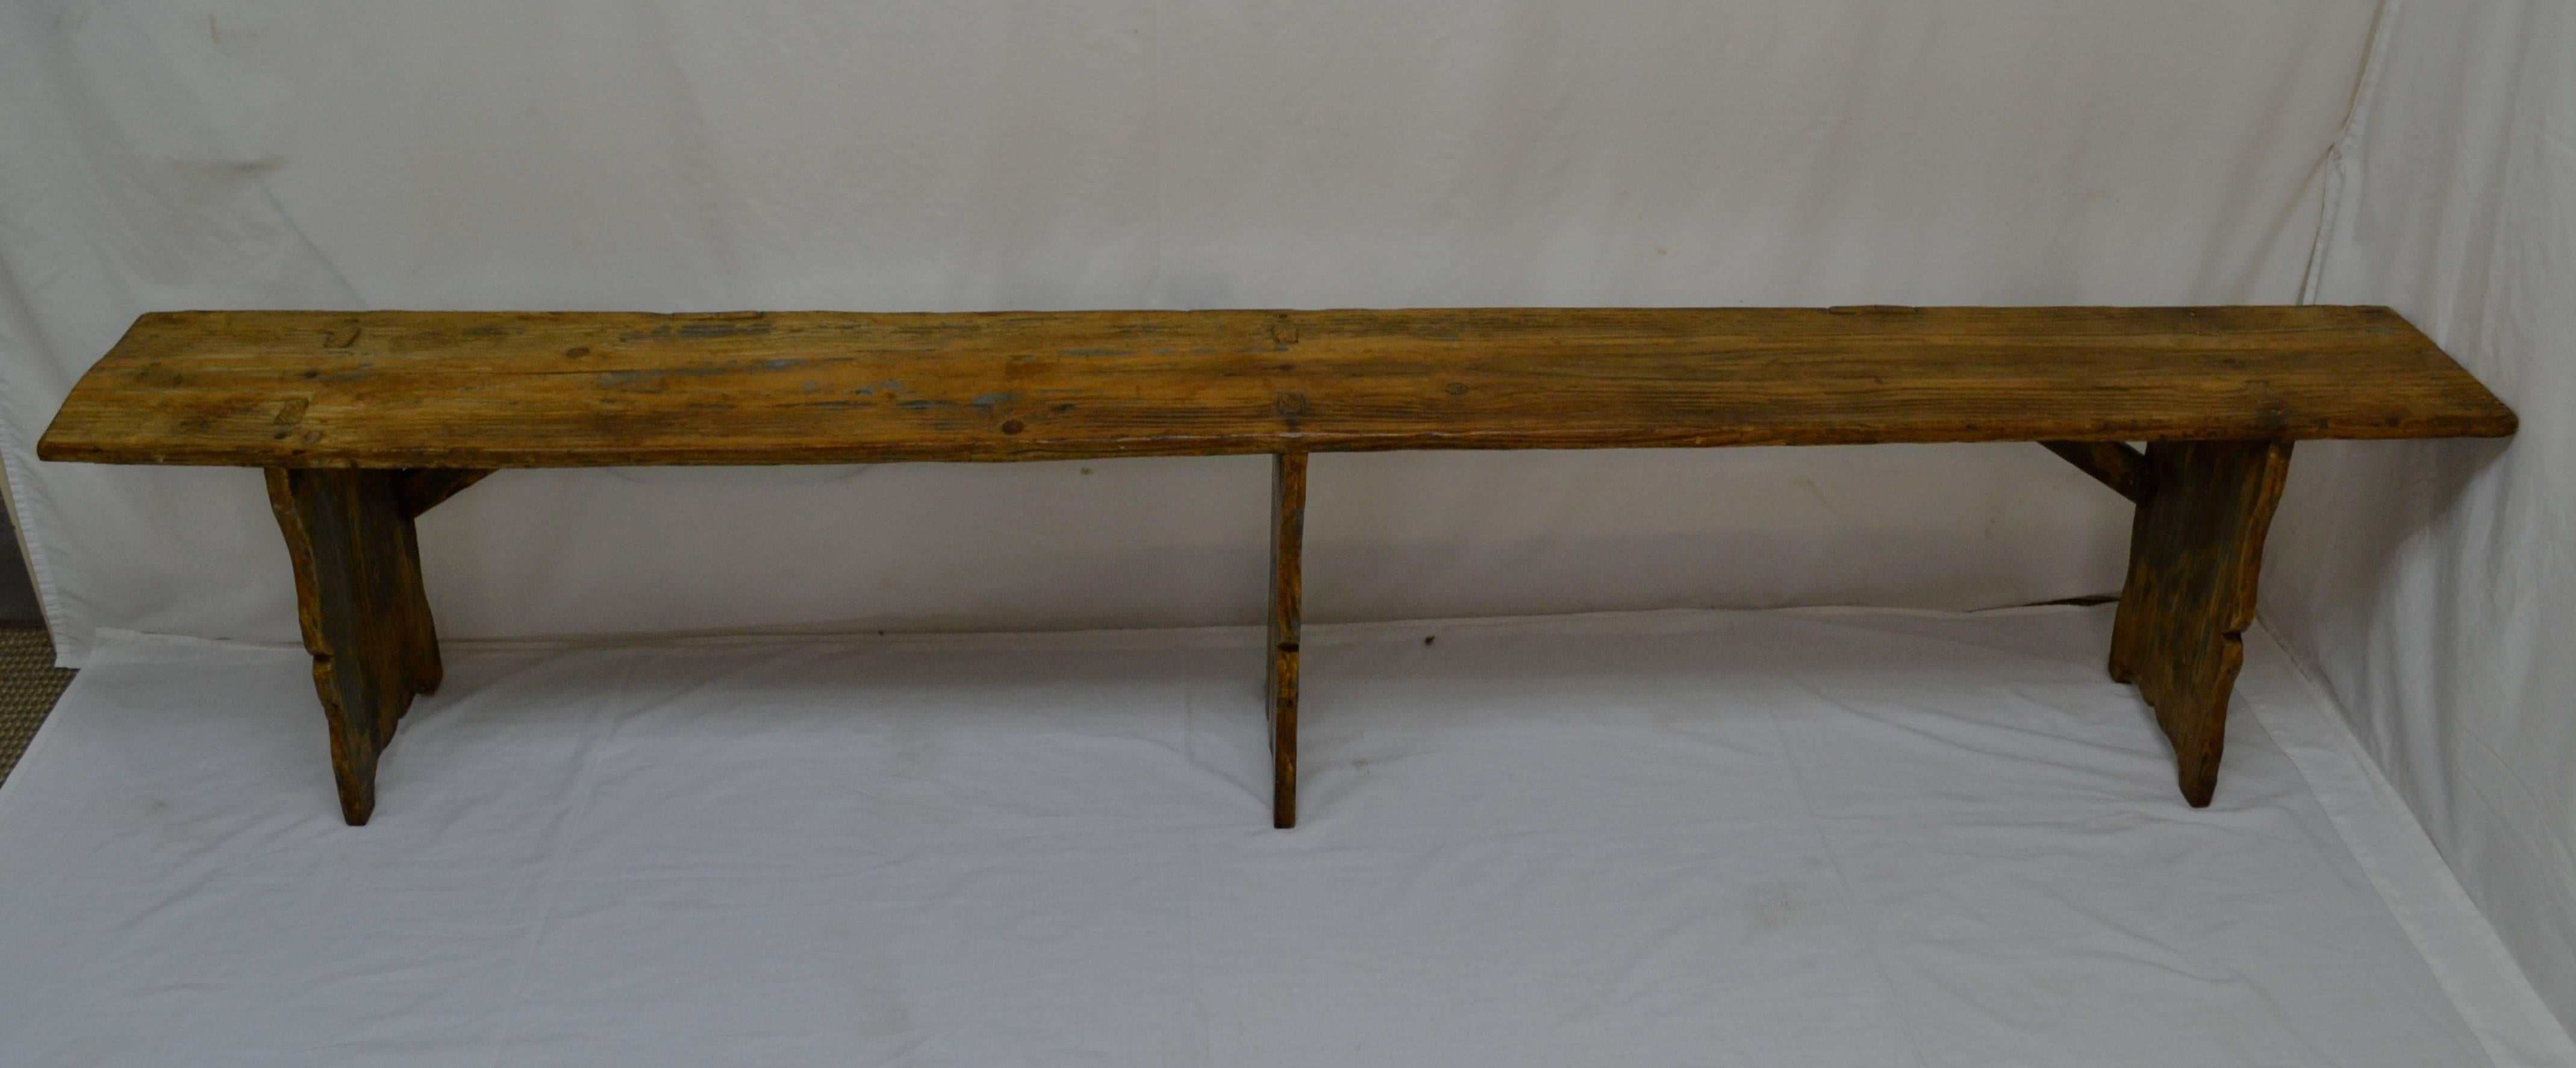 This is a beautiful long pine three-legged backless bench or form. All three trestle-style legs are through-tenoned into the thick single board seat, the outside two being slightly splayed and reinforced with diagonal braces at the back The legs